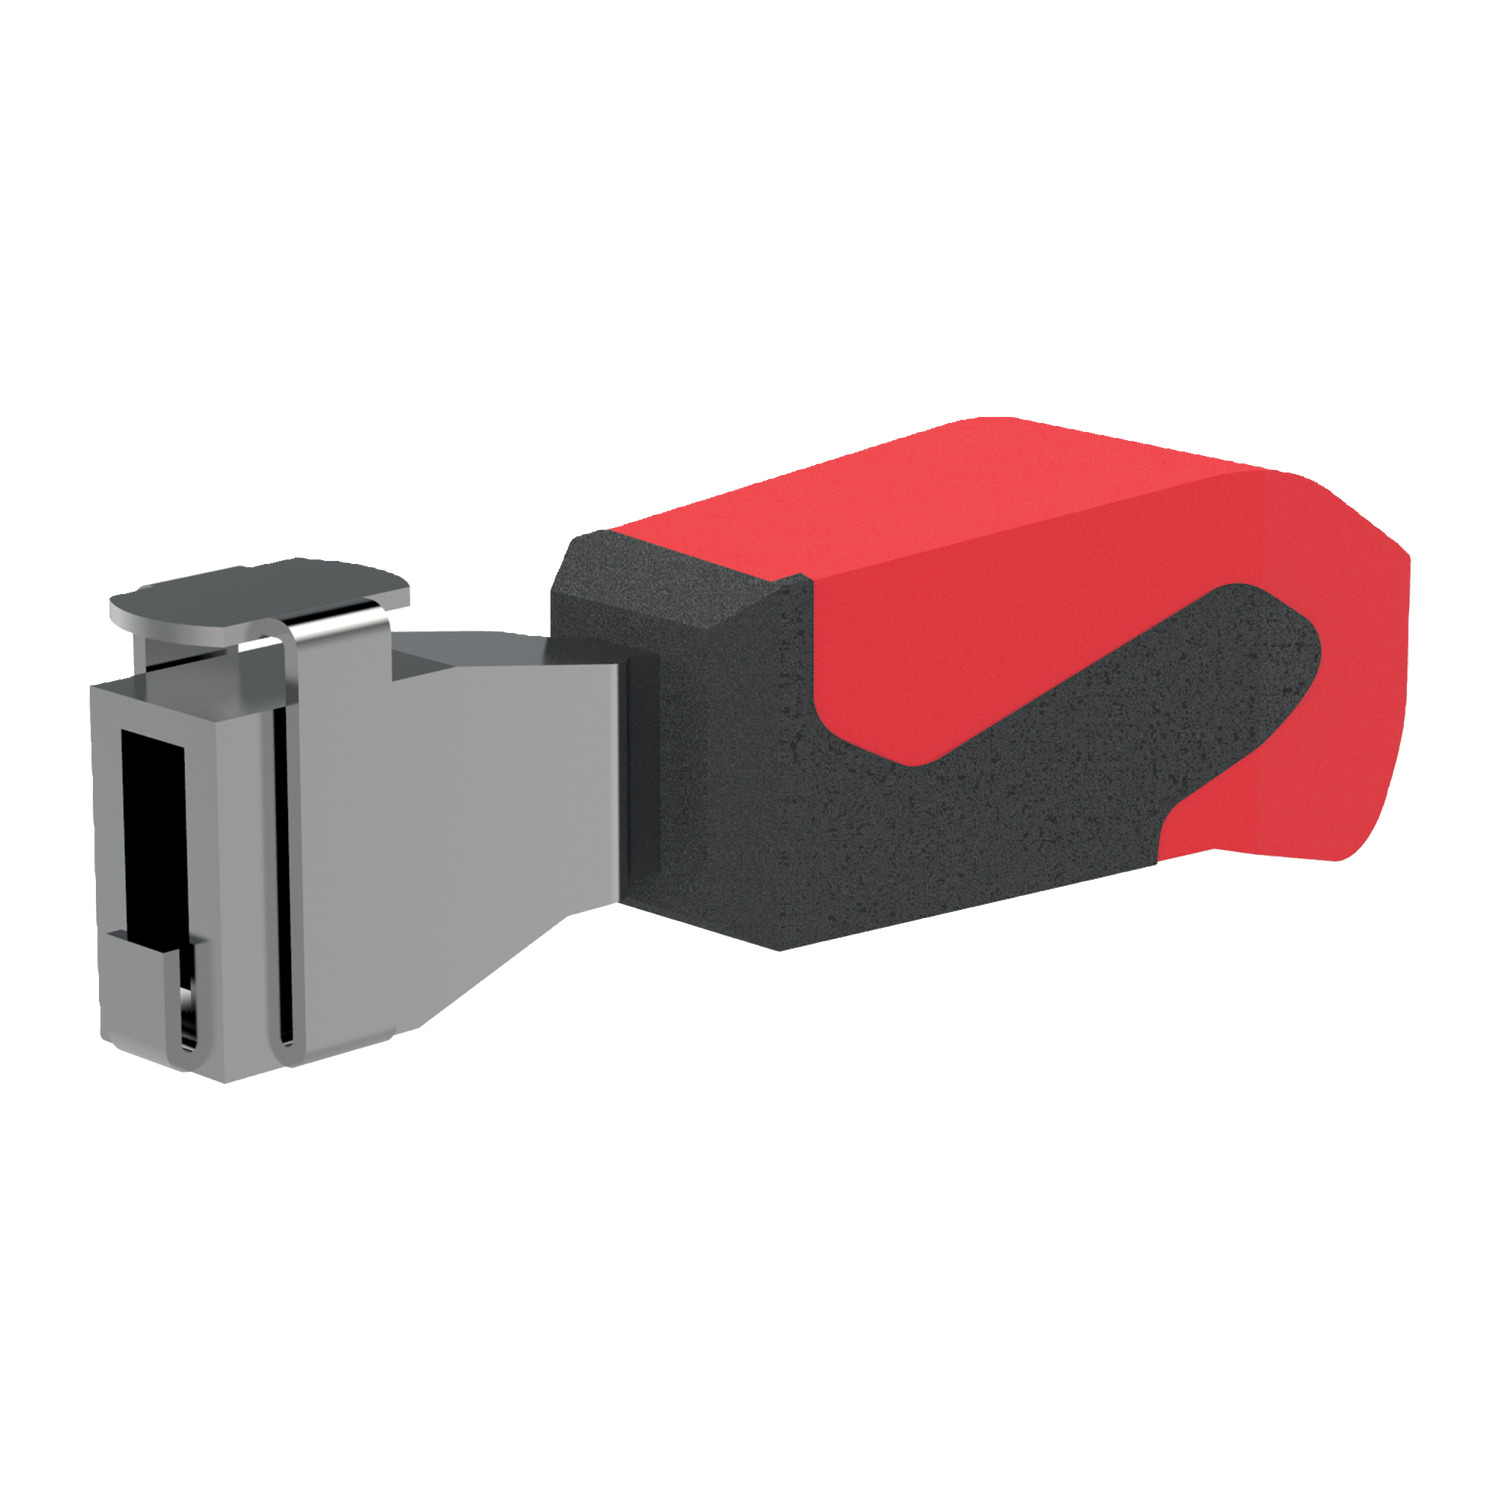 41005.W0104 Removable Handle for Toggle Clamp Red Handle, oil resistant. 134.5mm long.